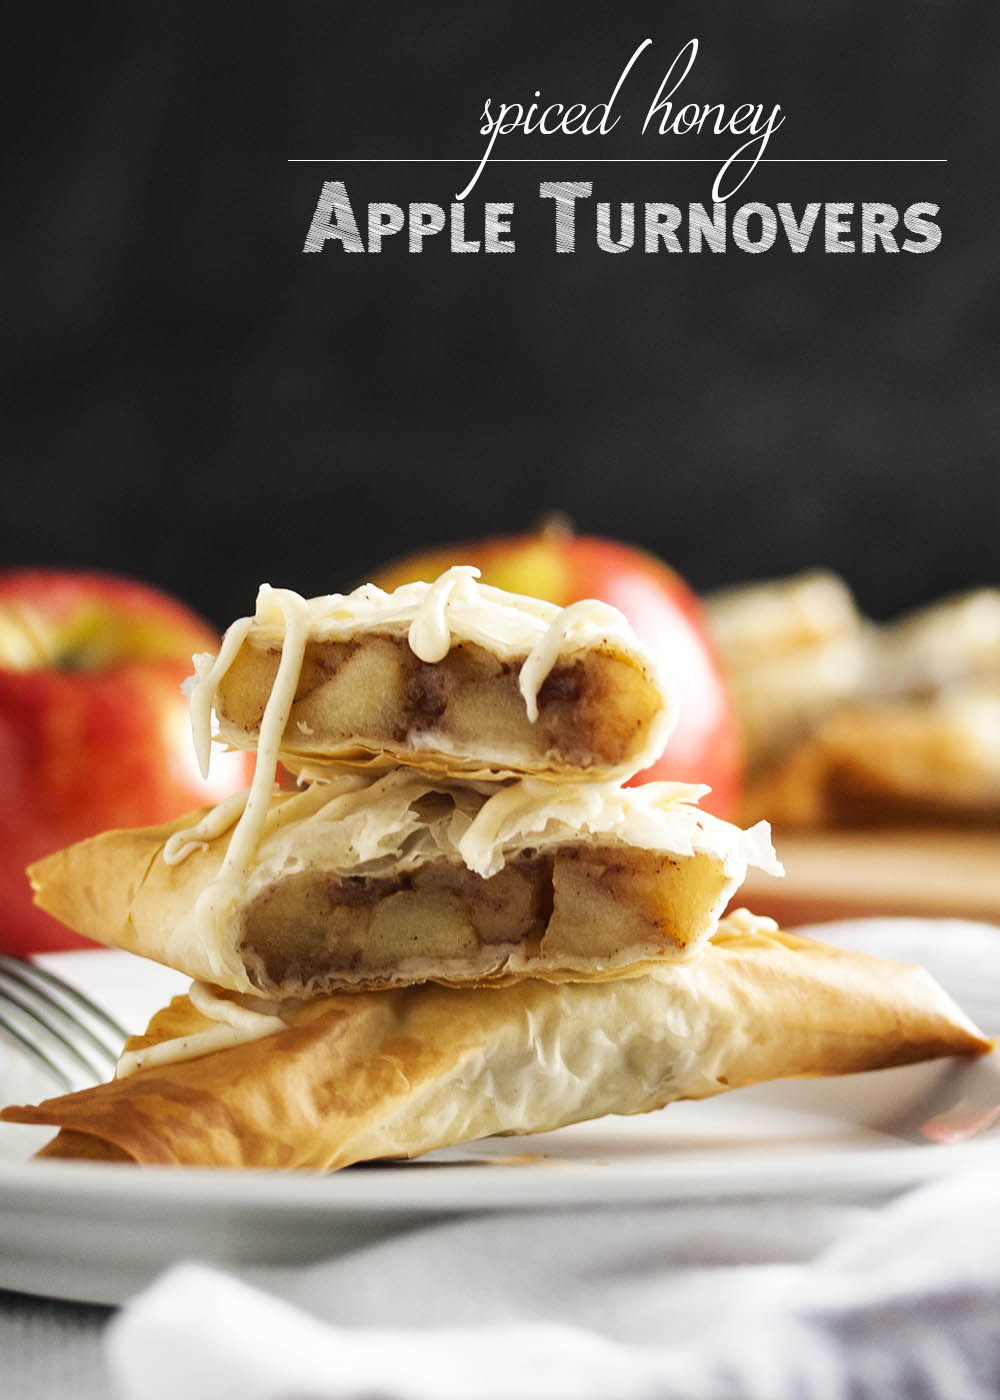 Spiced Honey Apple Turnovers - Layers of flaky fillo dough are wrapped around a filling of apples and honey all flavored with warm spices. Add a drizzle of honey icing on top and you have an apple turnover that will have you wanting more. | justalittlebitofbacon.com